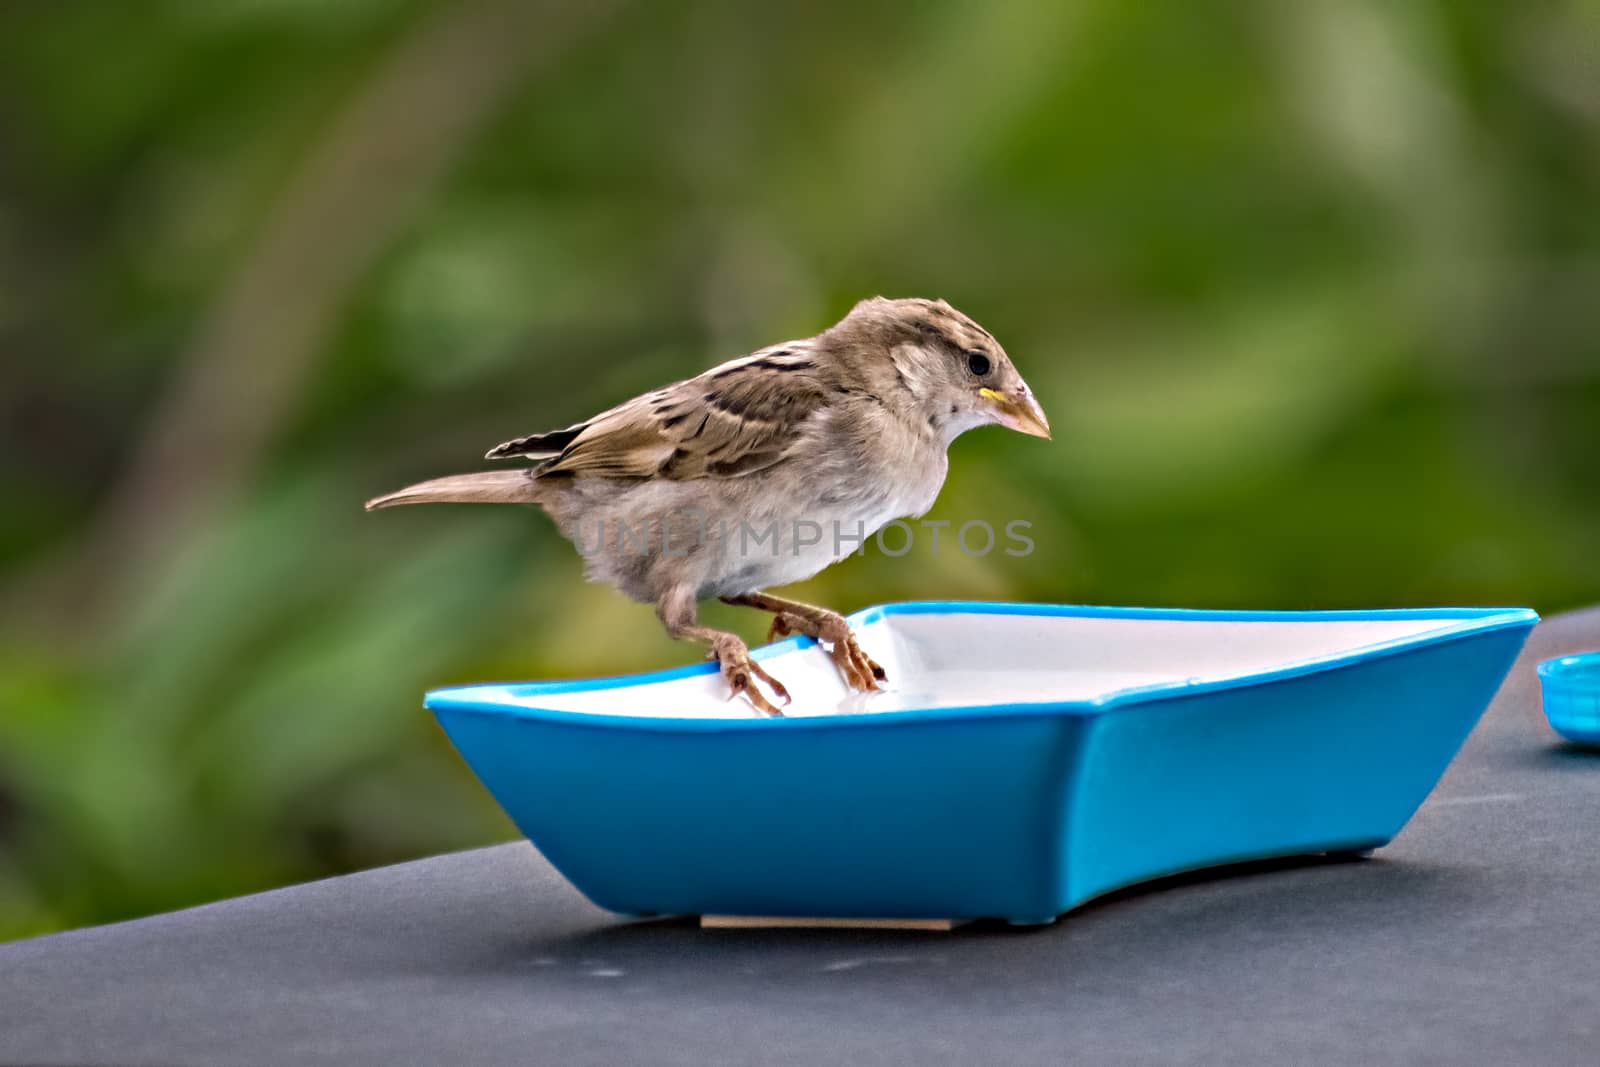 Selective focus, shallow depth of field, isolated image of a female sparrow on water bowl on wall with clear green background.